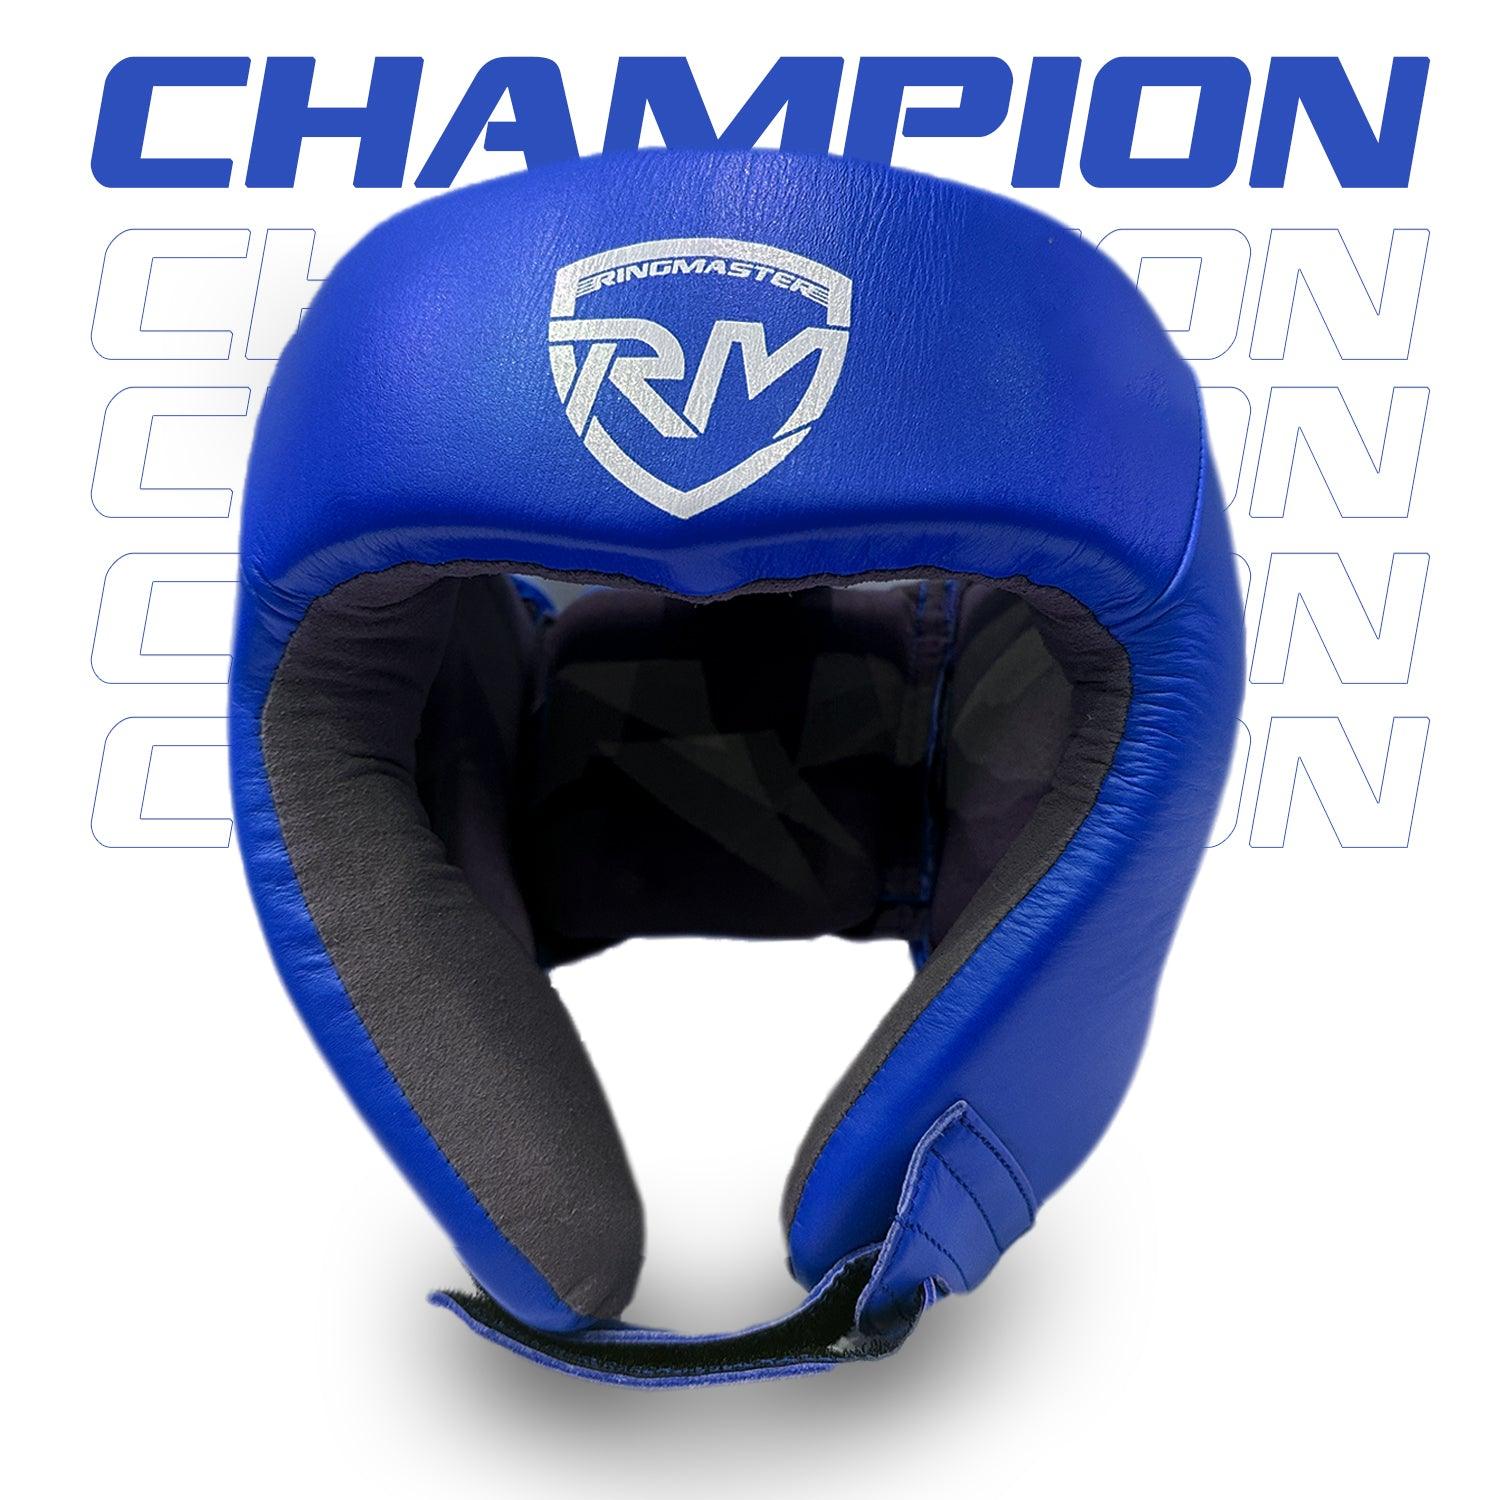 Ringmaster Head guard Boxing, Best boxing head guard, boxing head guard uk, MMA head guard, boxing headgear, Martial Arts head guard, boxing head guard open face, Boxing head guard for sale, face guard boxing, Blue Head guard Boxing, RingMaster Sports Open Face Boxing HeadGuard Synthetic Leather Blue Image 2